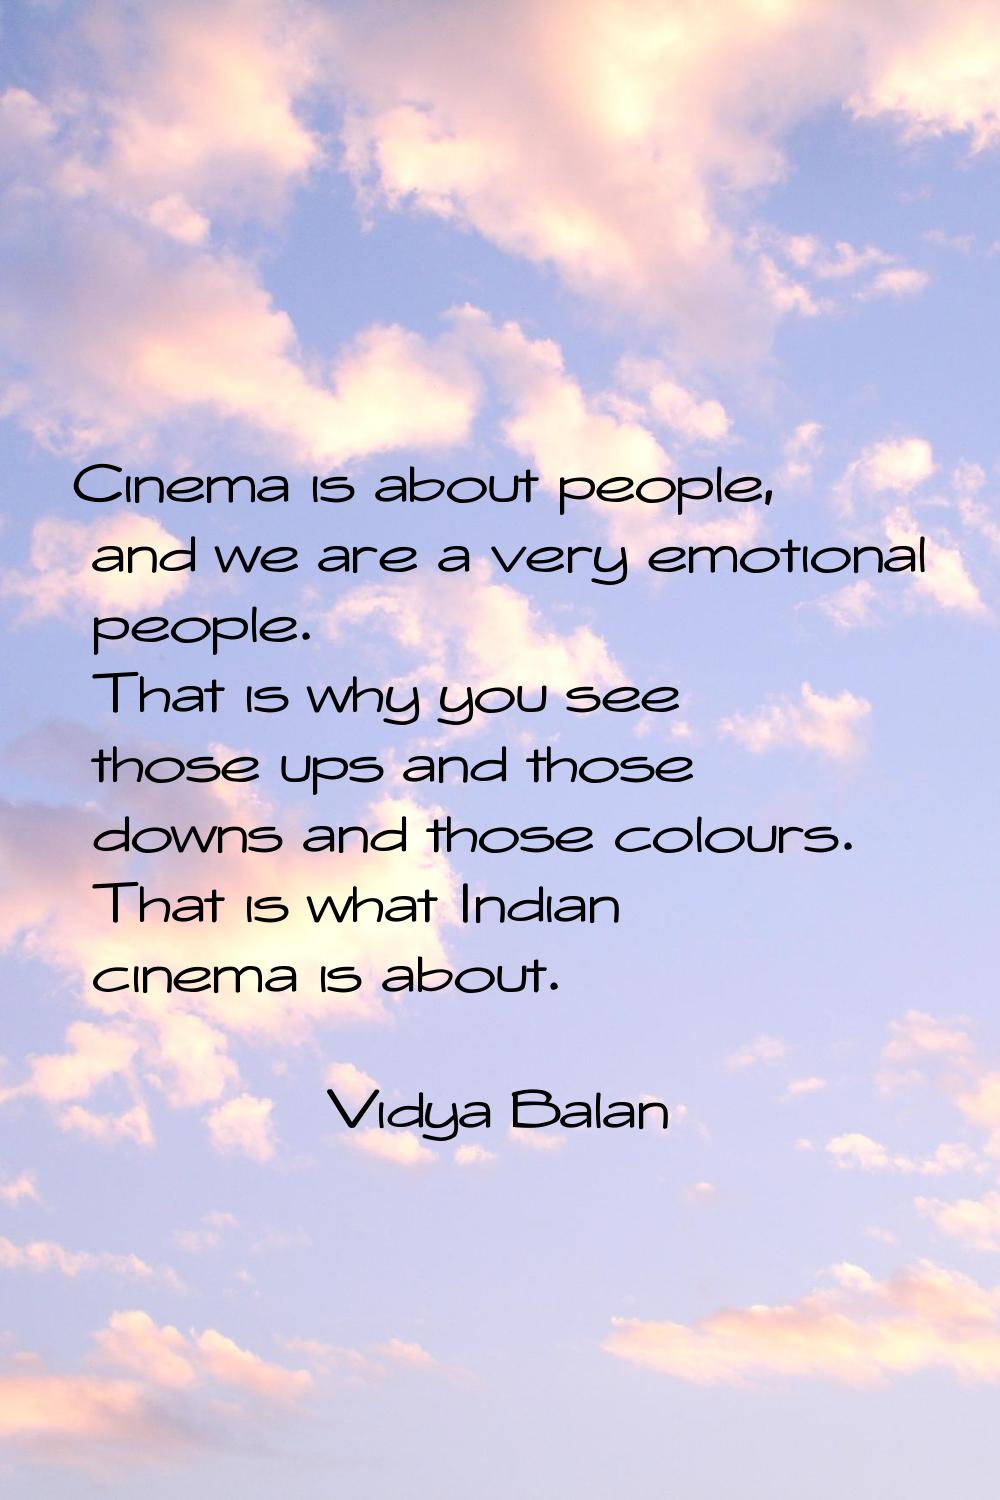 Cinema is about people, and we are a very emotional people. That is why you see those ups and those